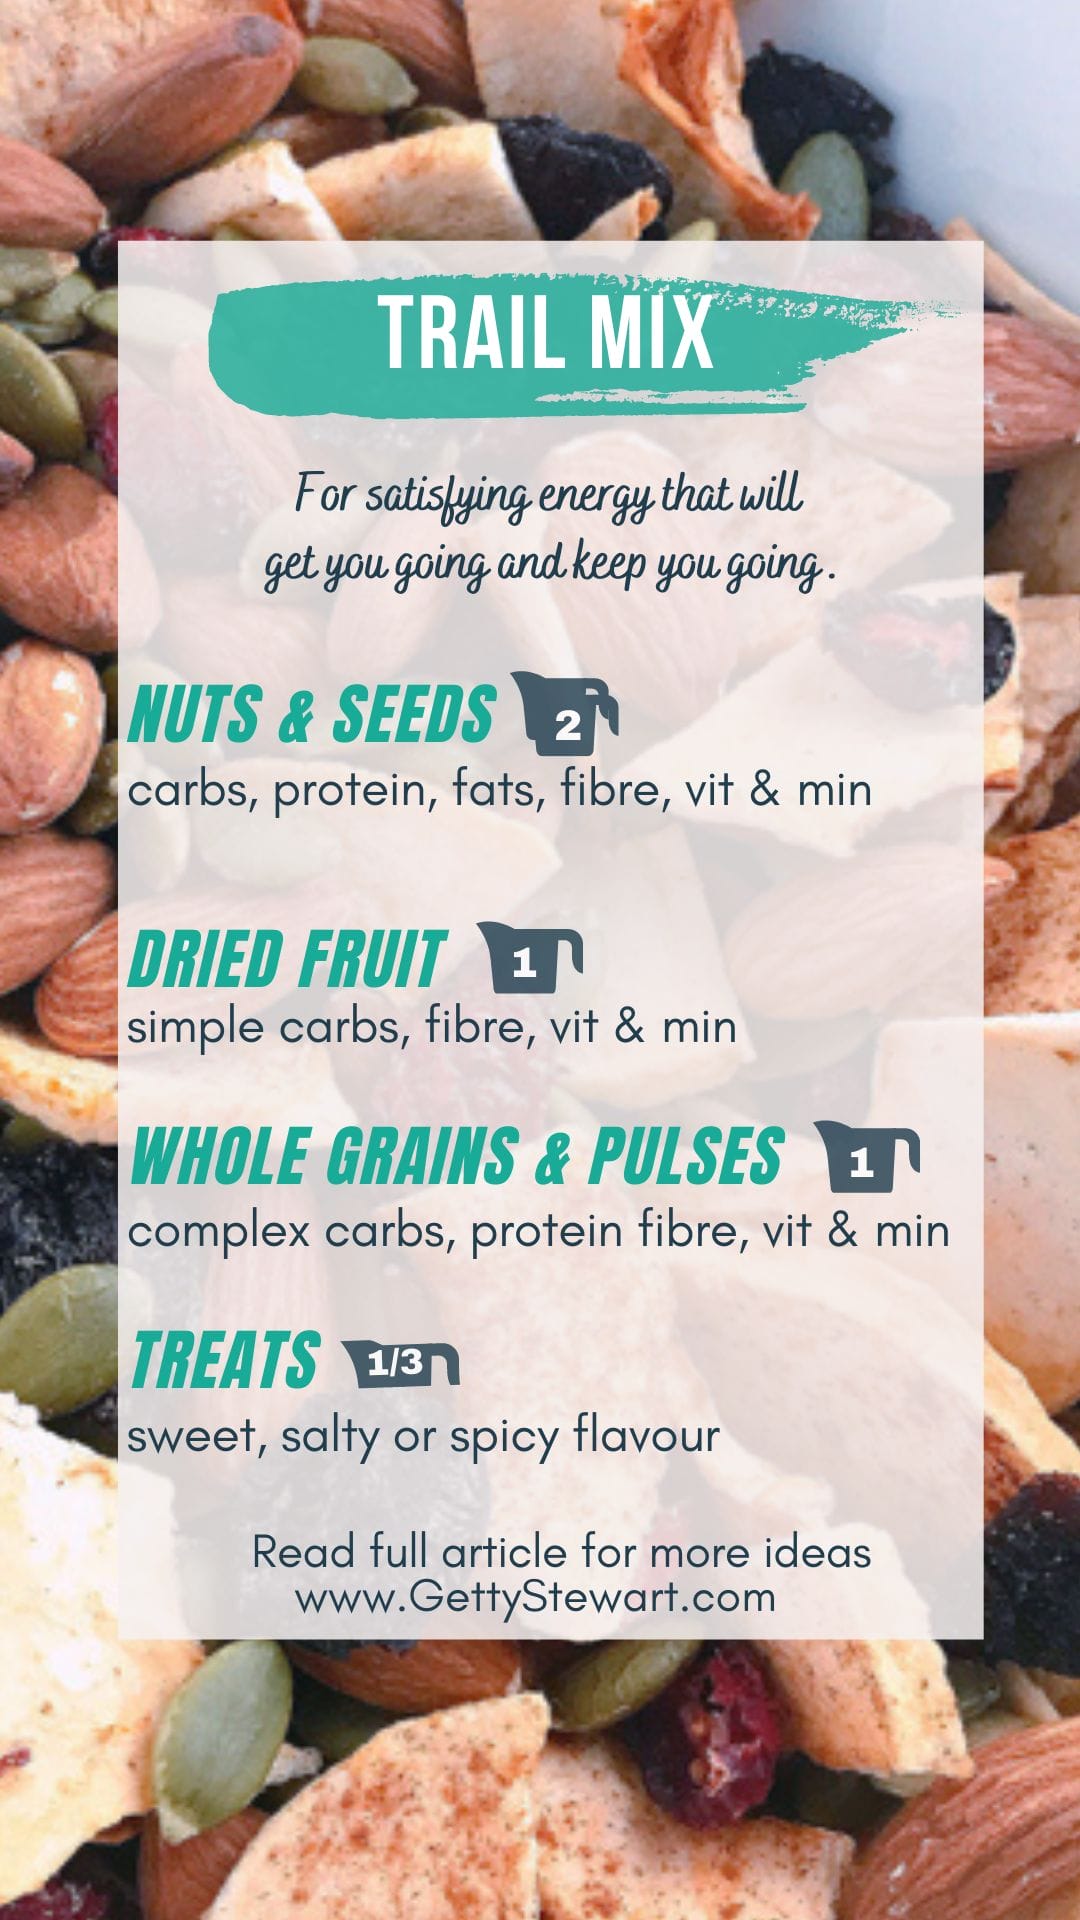 trail mix ingredients and ratios